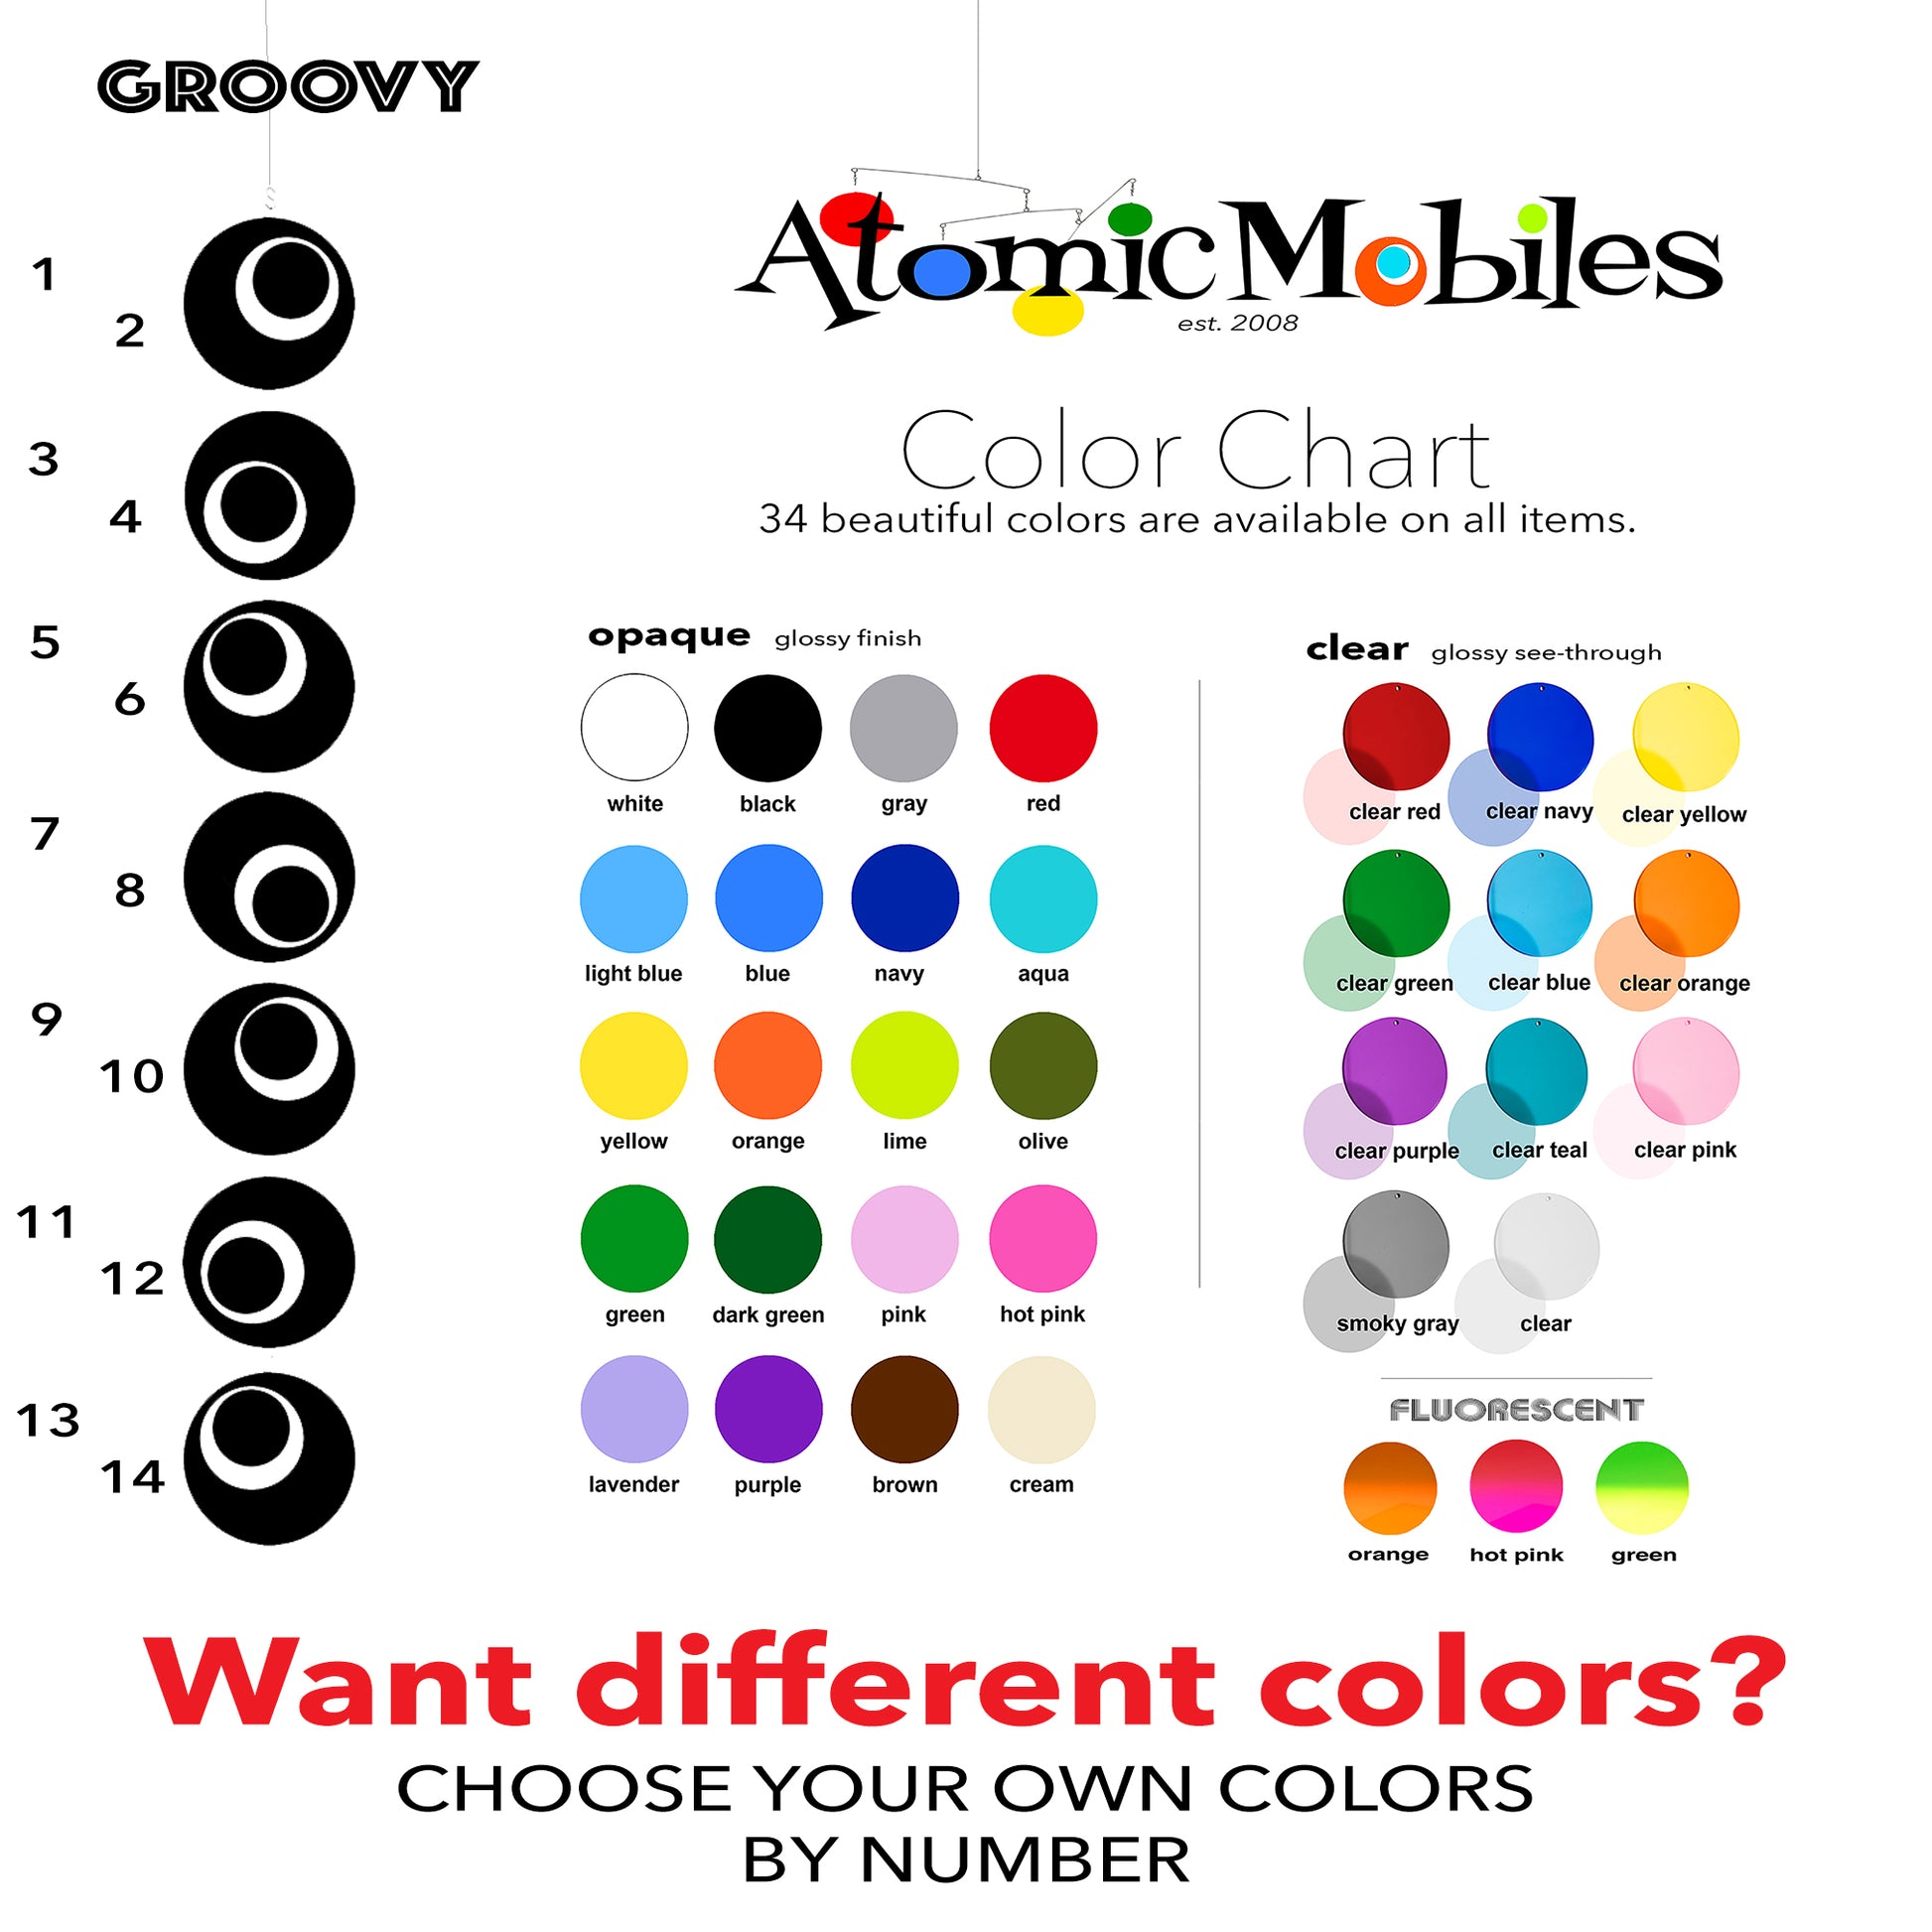 Groovy Color Chart for vertical. hanging art mobiles by AtomicMobiles.com